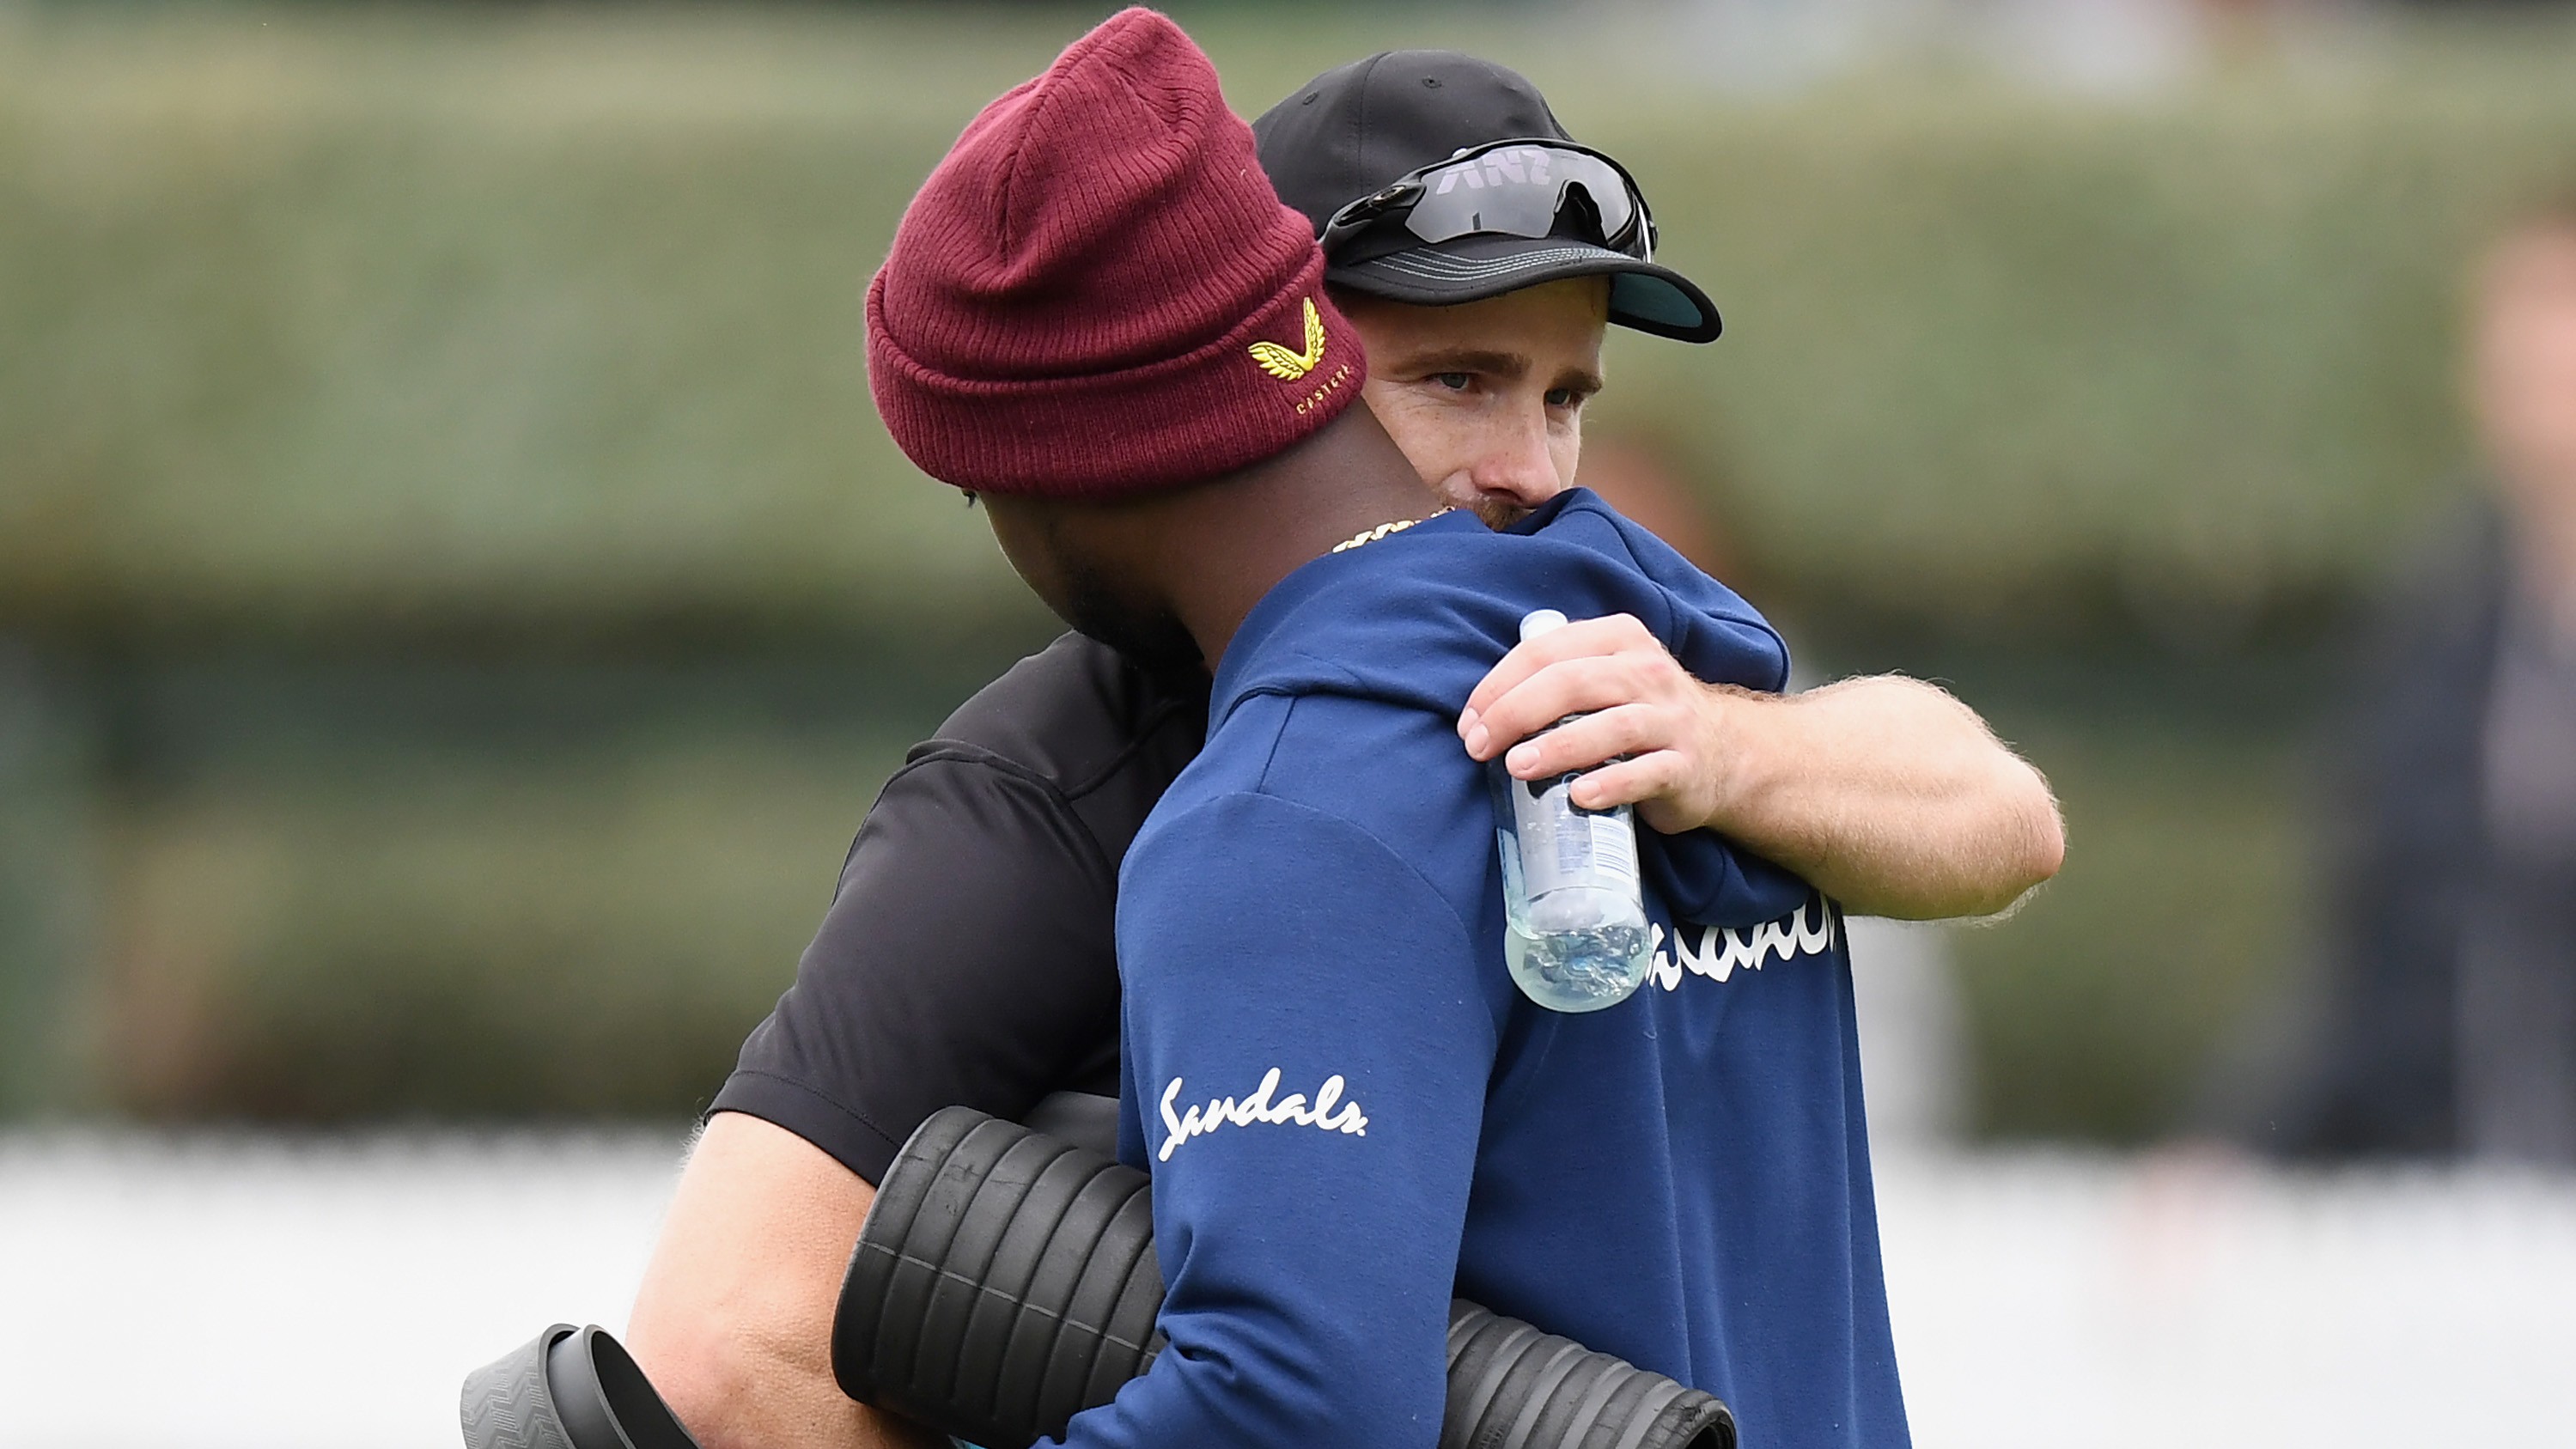 NZ v WI 2020: Kane Williamson wins hearts after hugging bereaved Kemar Roach who had lost his father